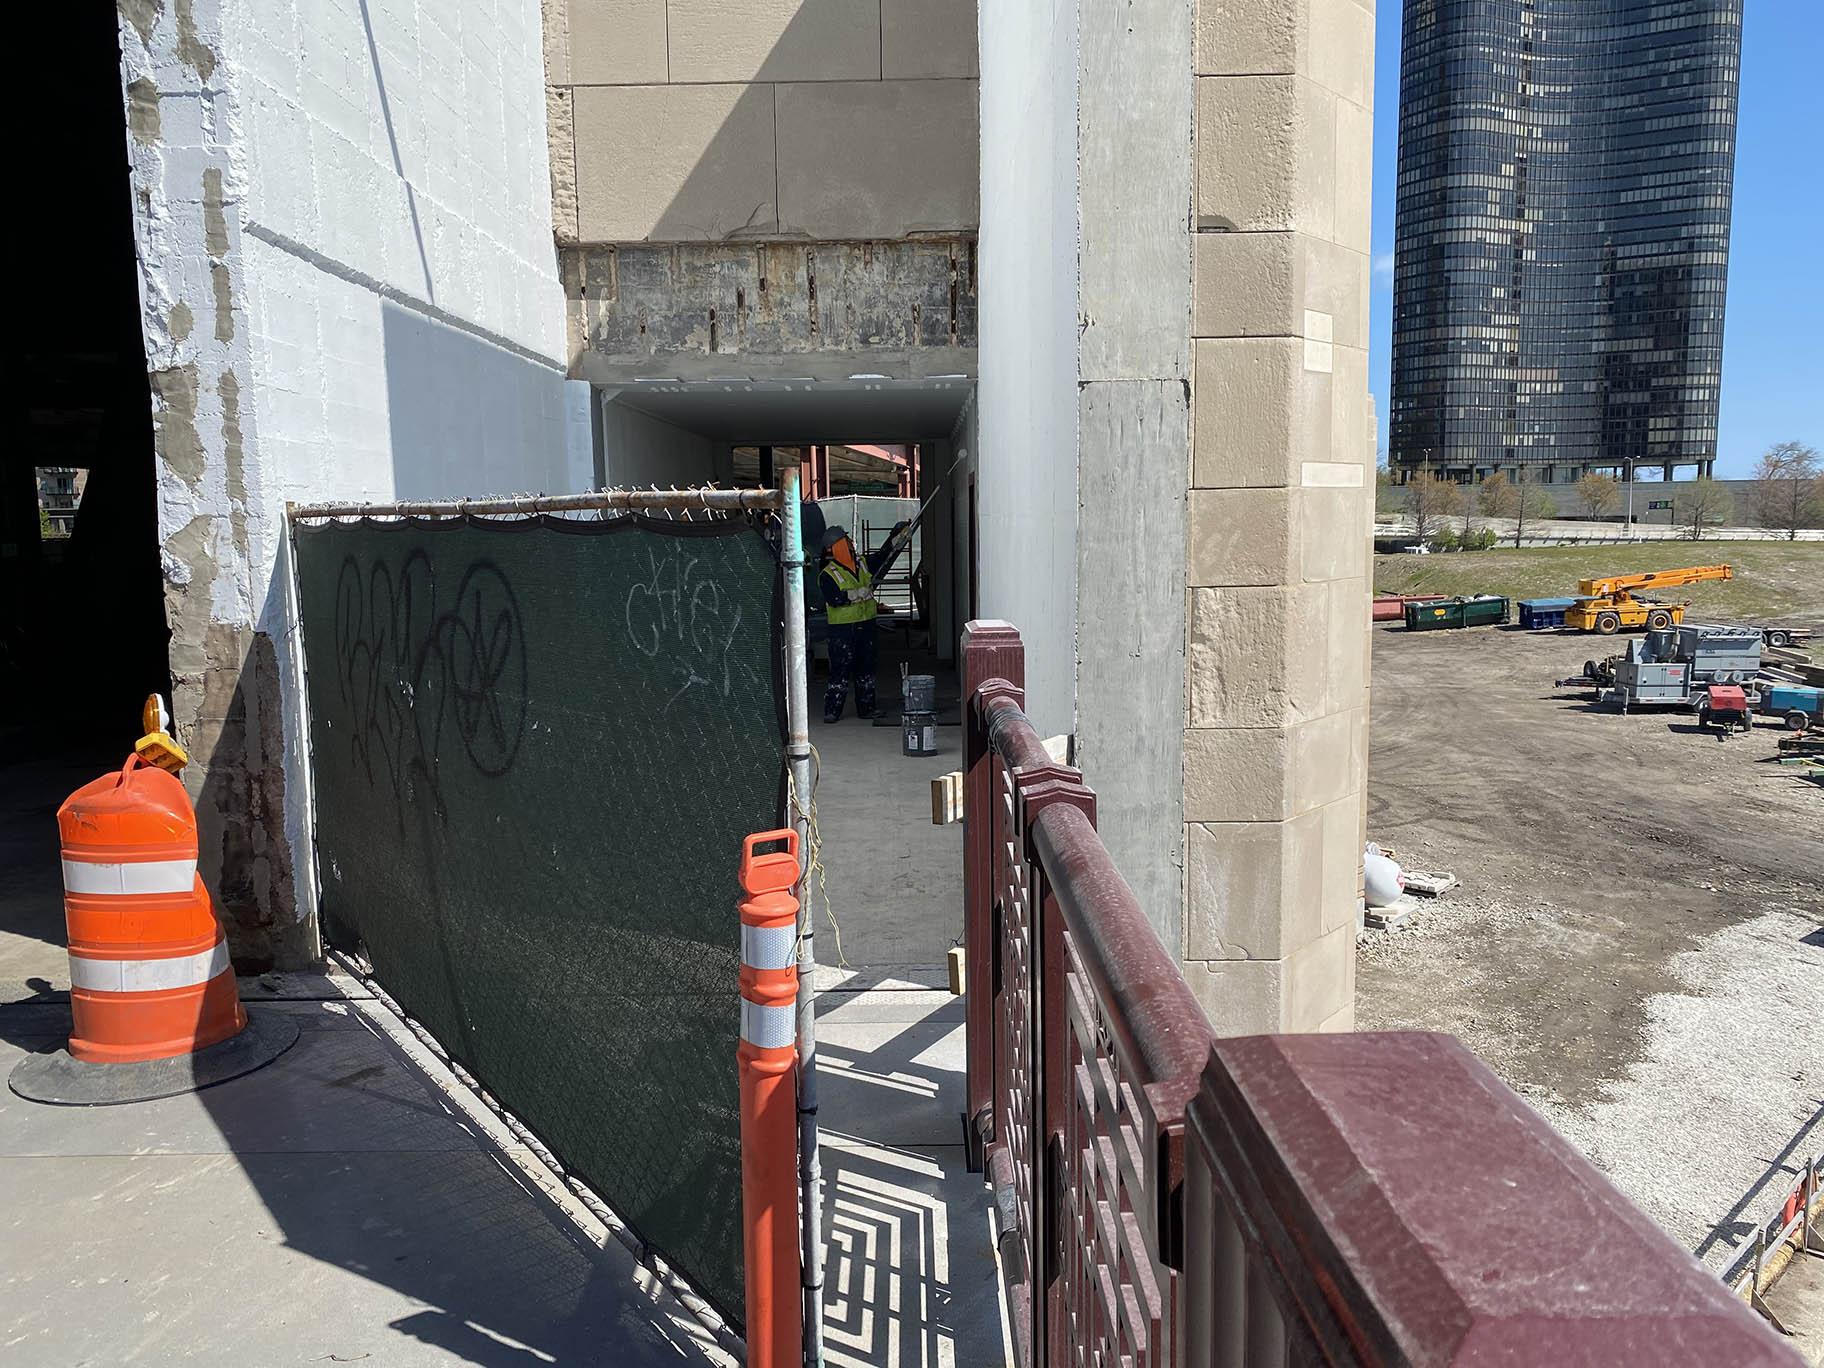 Crews work to paint the inside of a bridge house that was tunneled through to accommodate runners and cyclists on the Navy Pier Flyover portion of the lakefront trail, April 30, 2021. (Nick Blumberg / WTTW News)